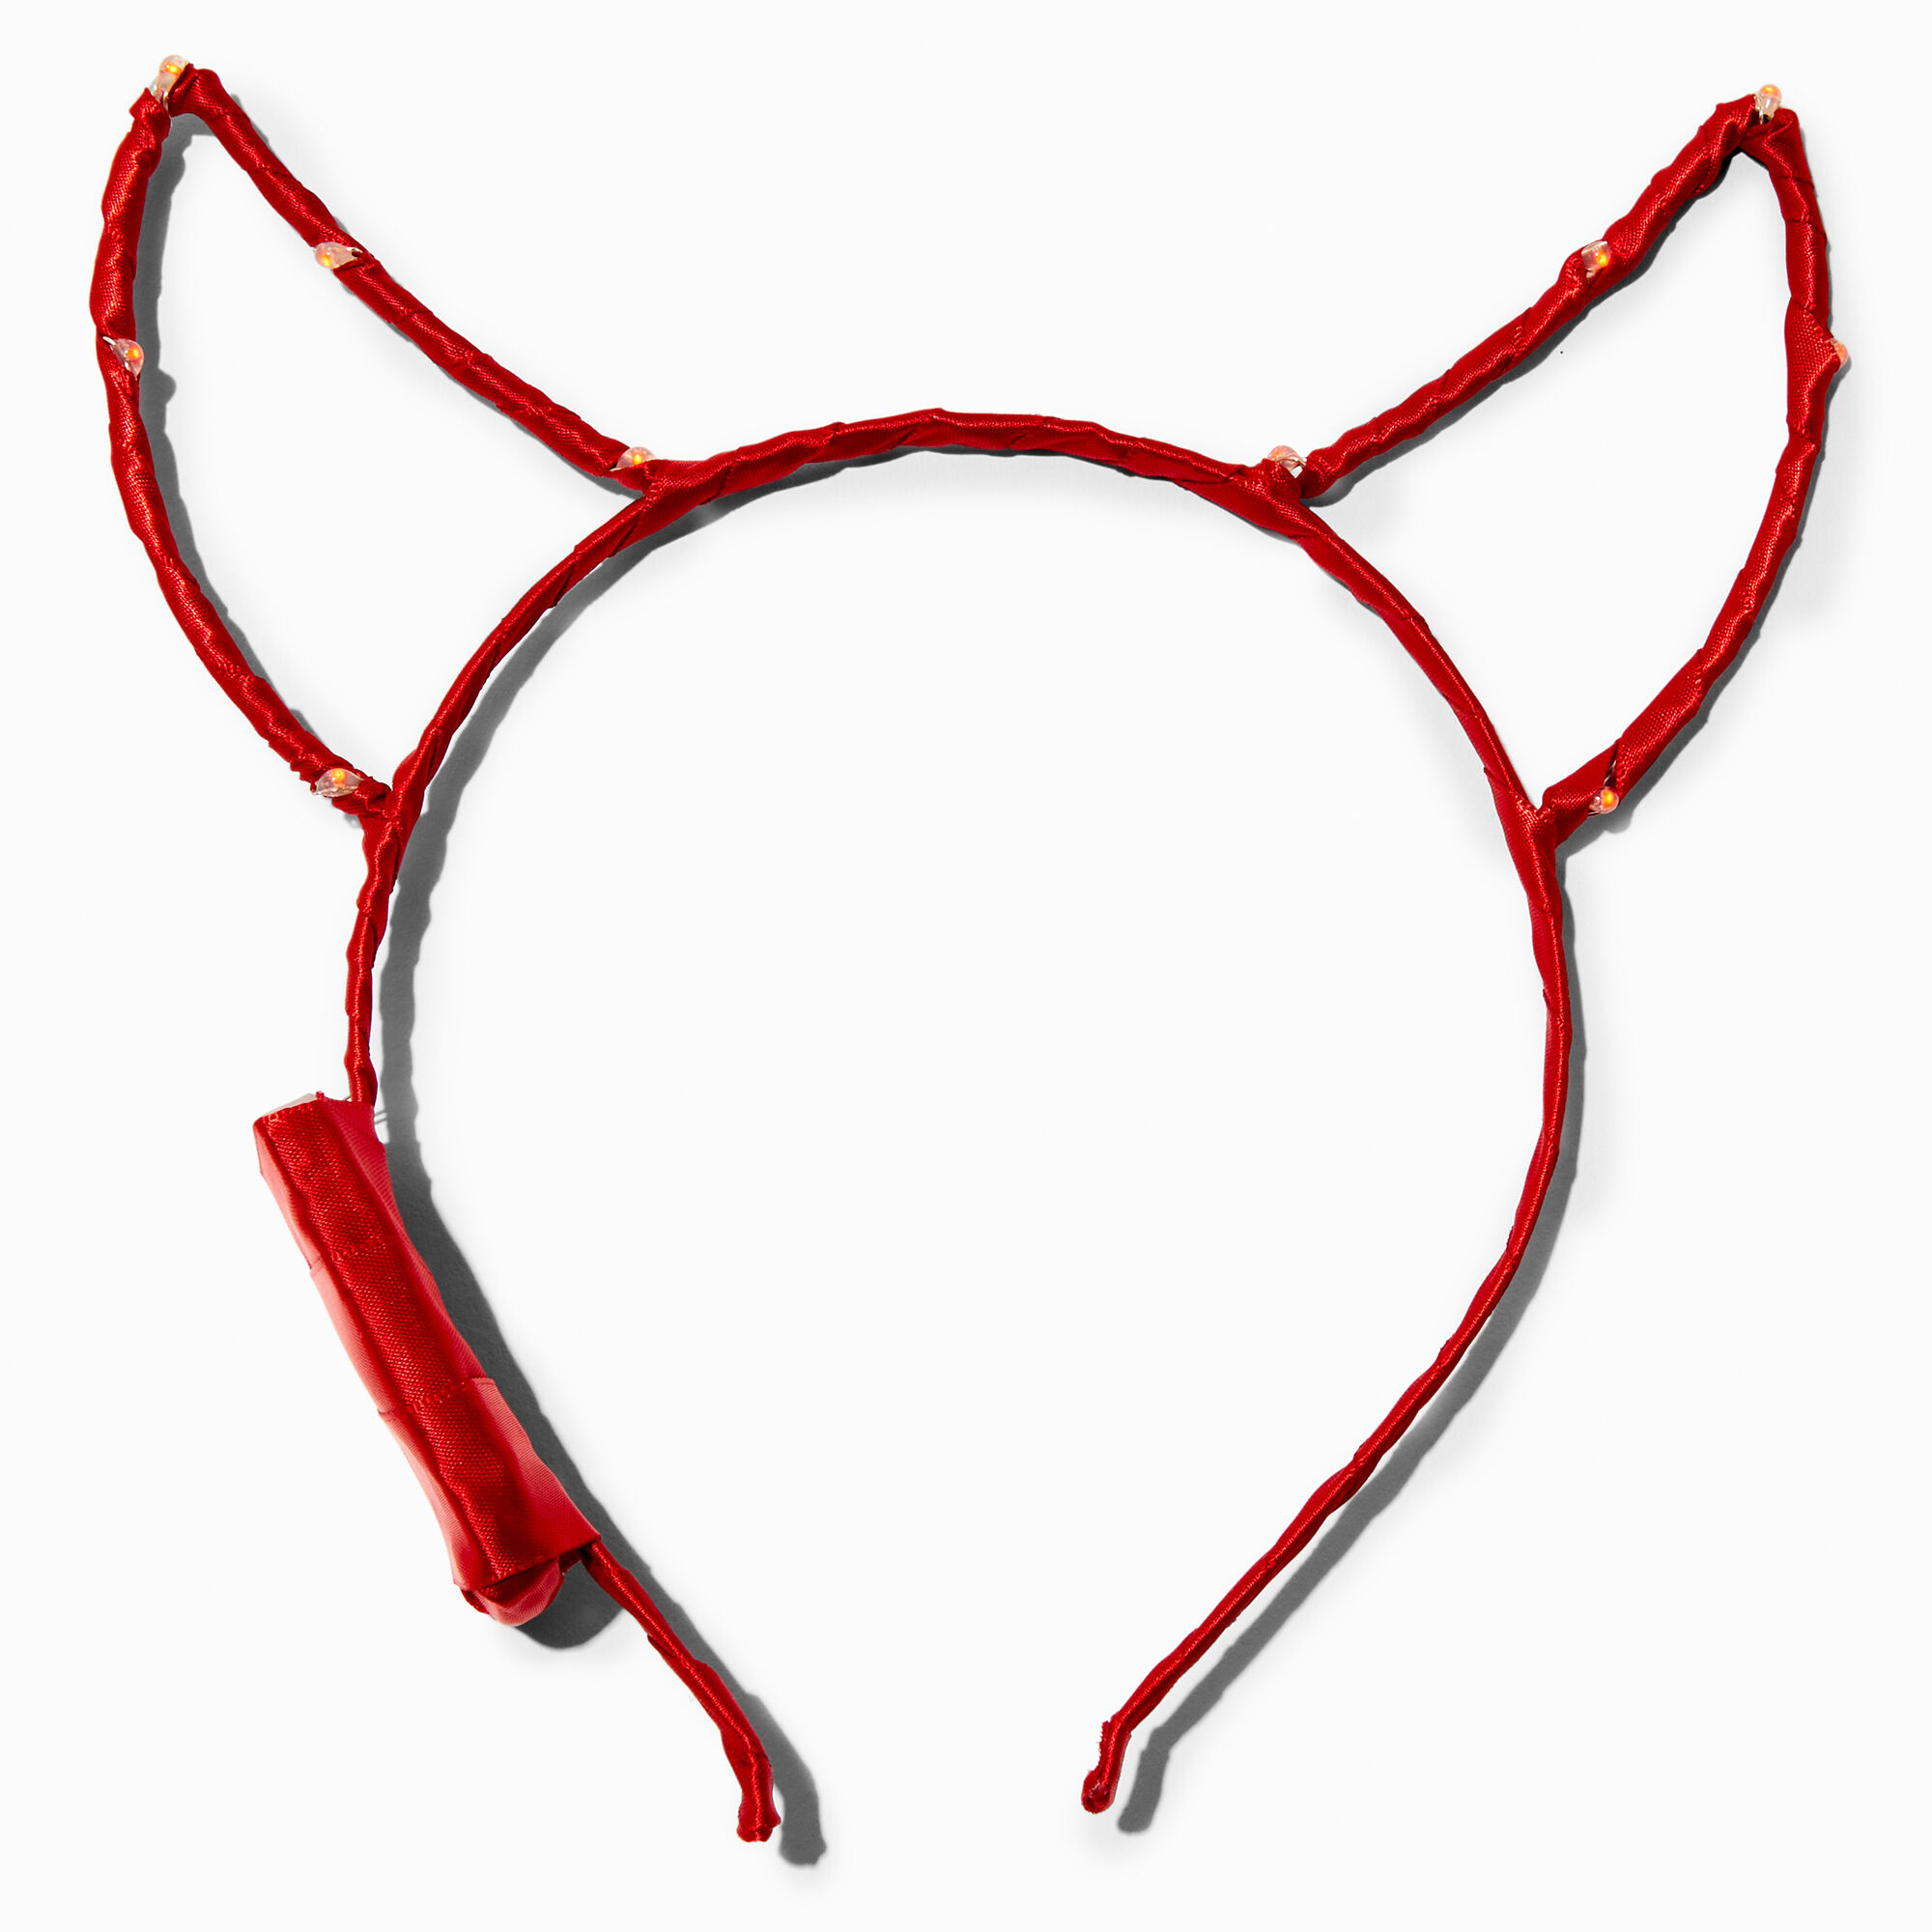 View Claires Light Up Devil Ears Headband Red information